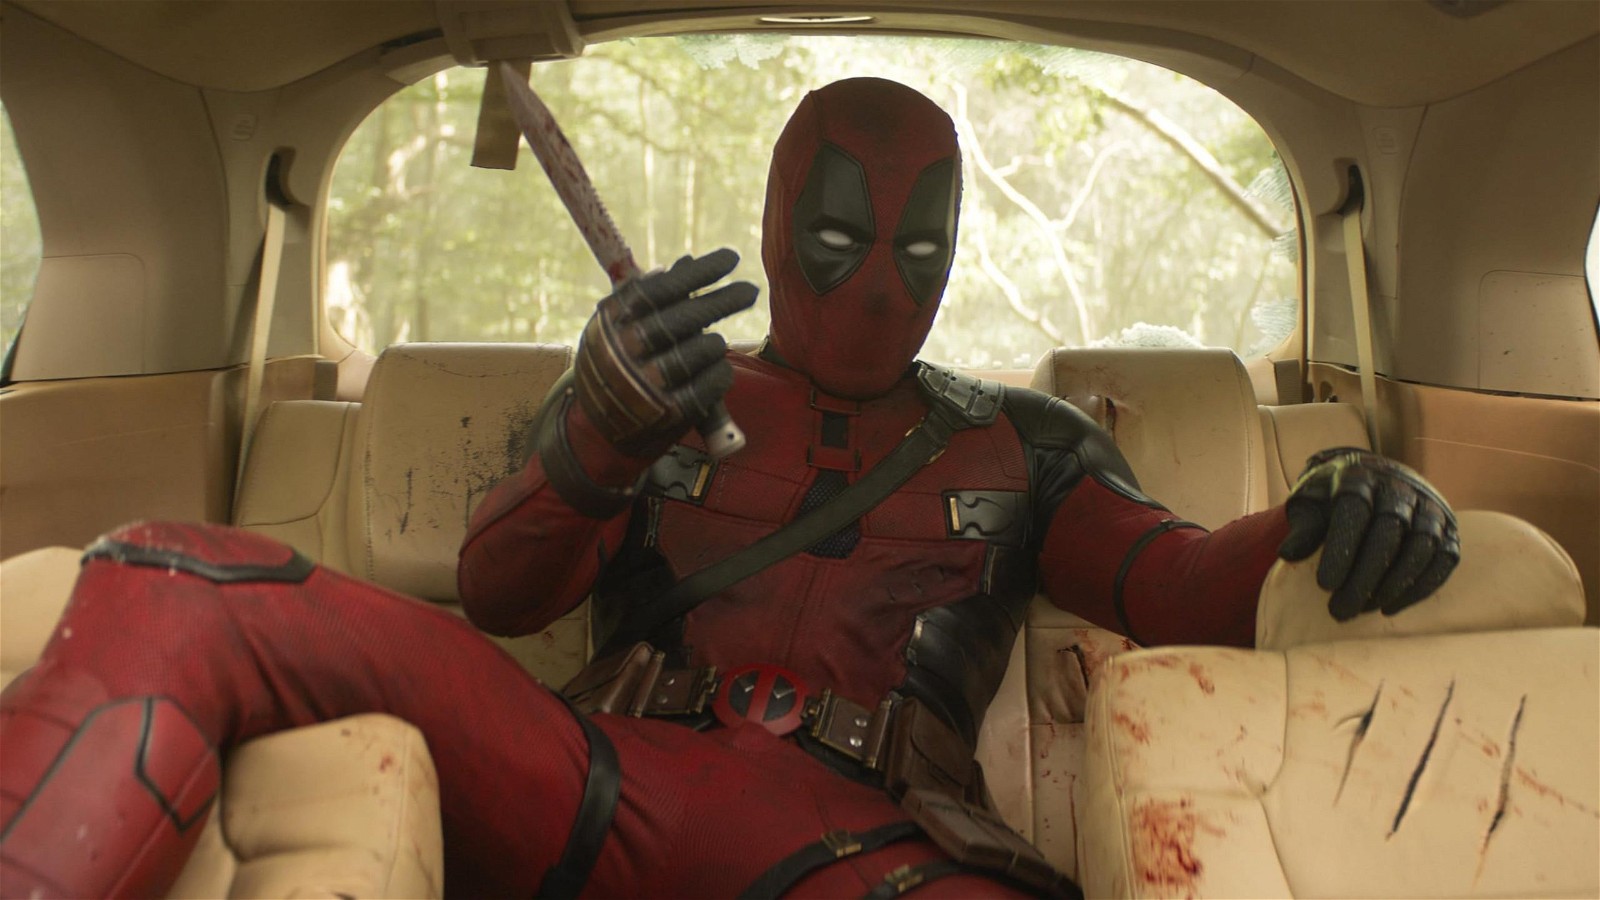 Ryan Reynolds' Deadpool 3 will feature Chris Hemsworth's Thor in a brief appearance